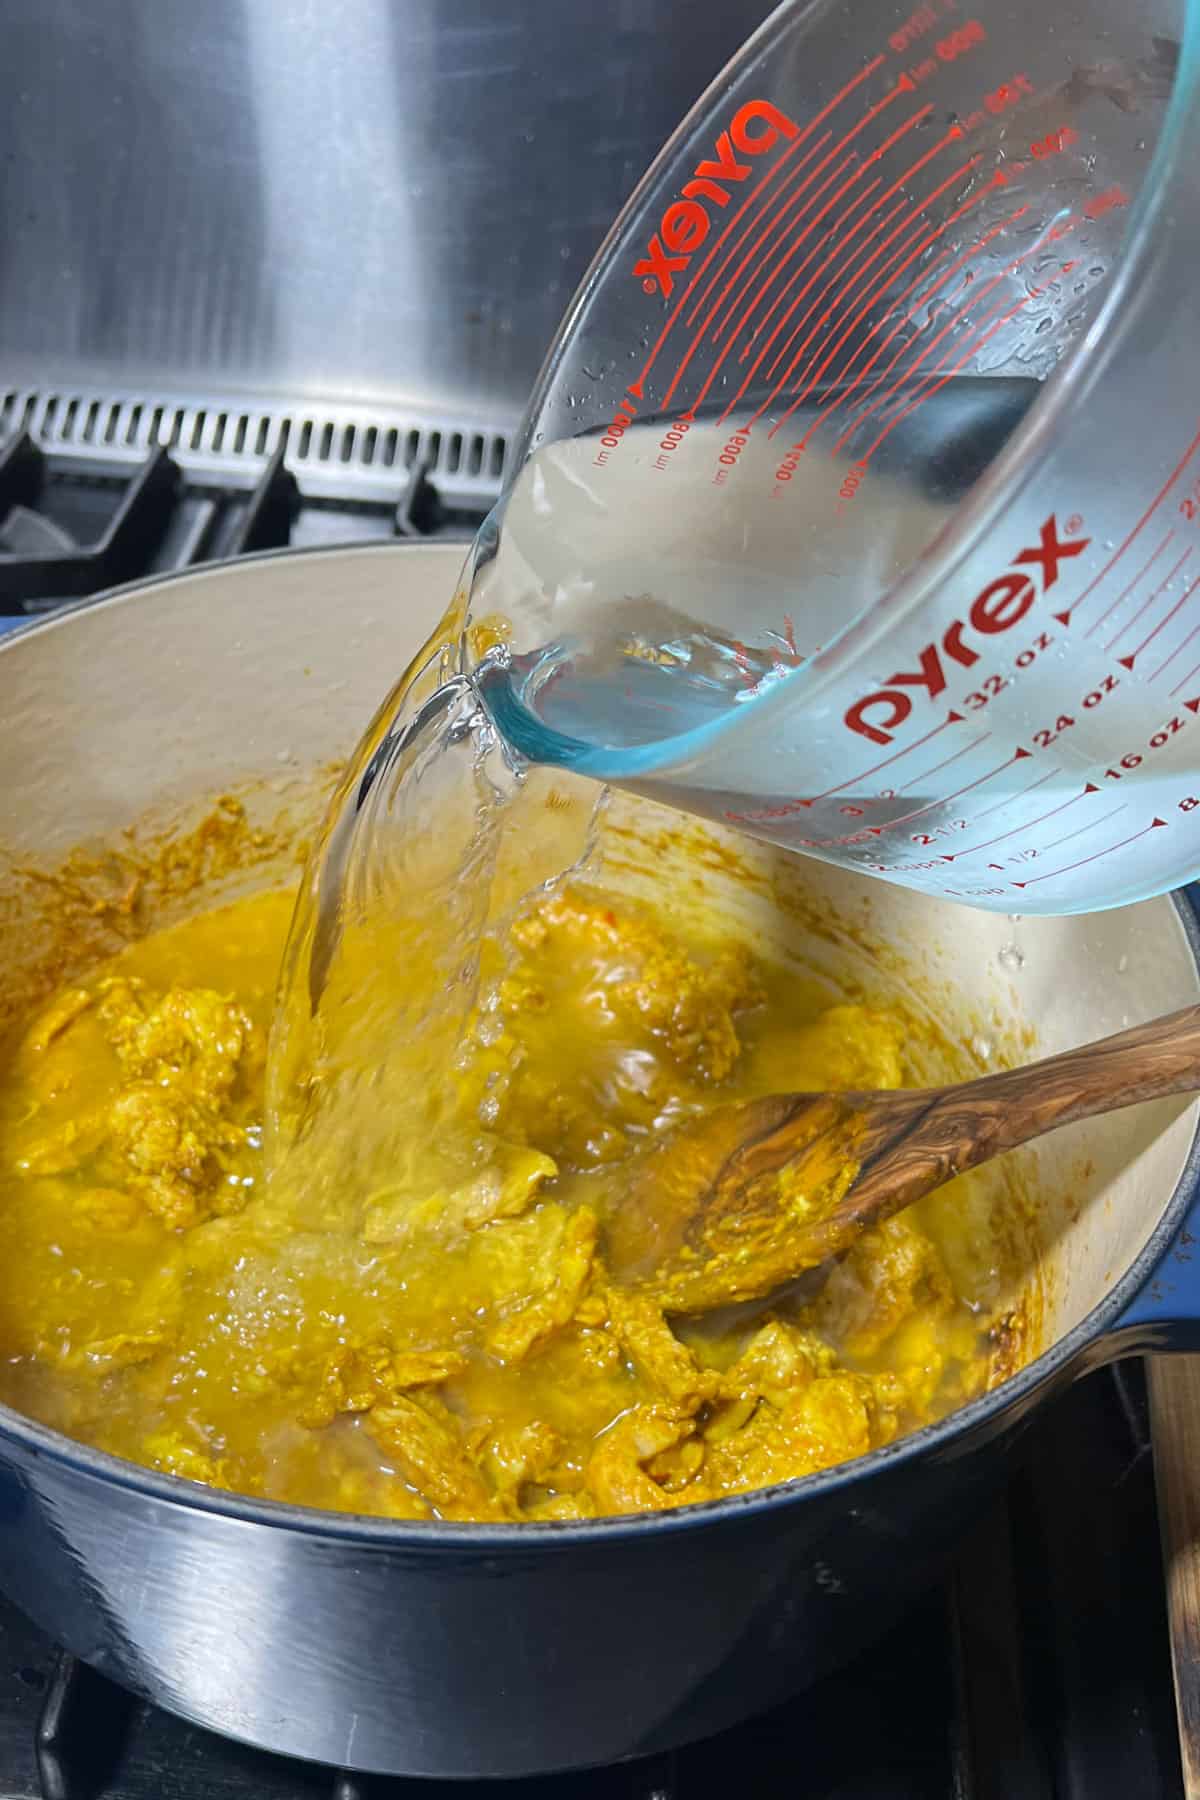 Water being poured into a Dutch oven filled with sauteed turmeric chicken.